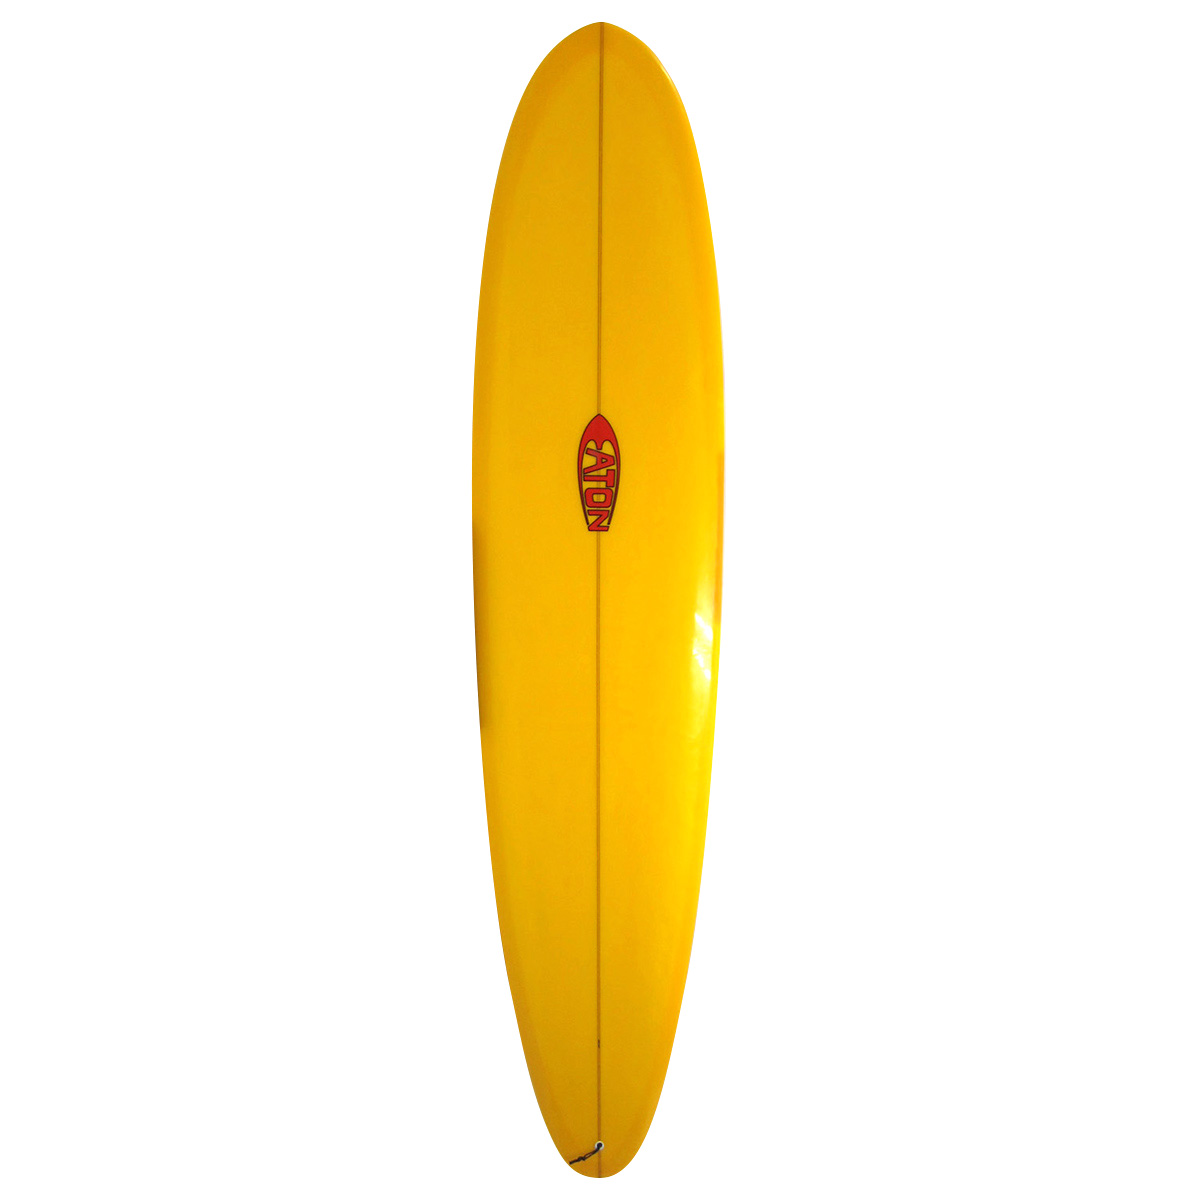 EATON SURFBOARDS / 9'0 Zinger Shaped By Mike Eaton